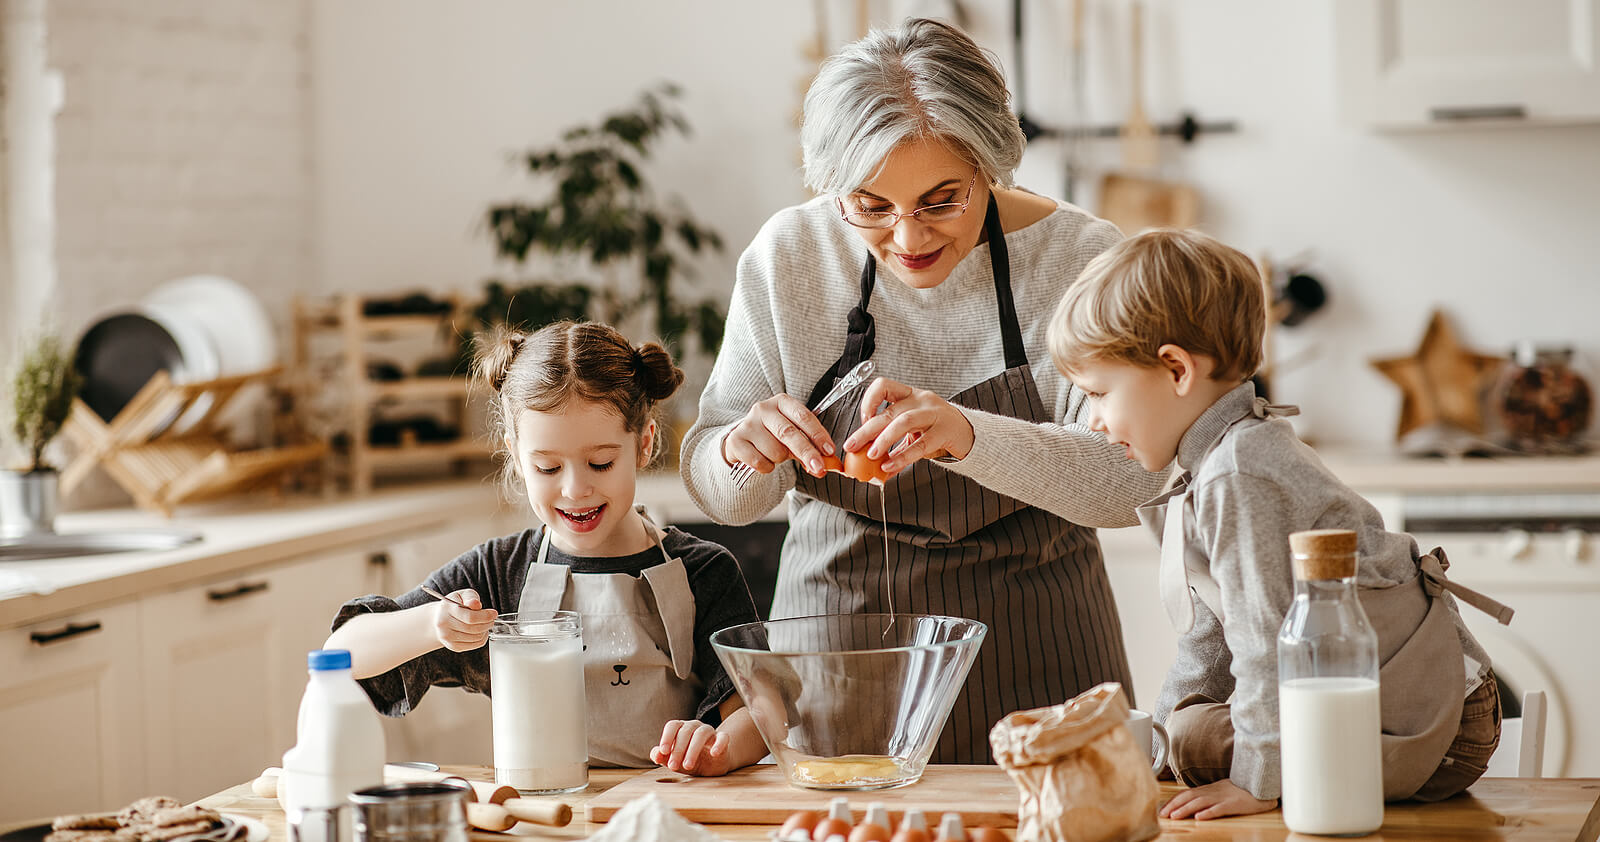 A grandma baking with her granddaughter and grandson.